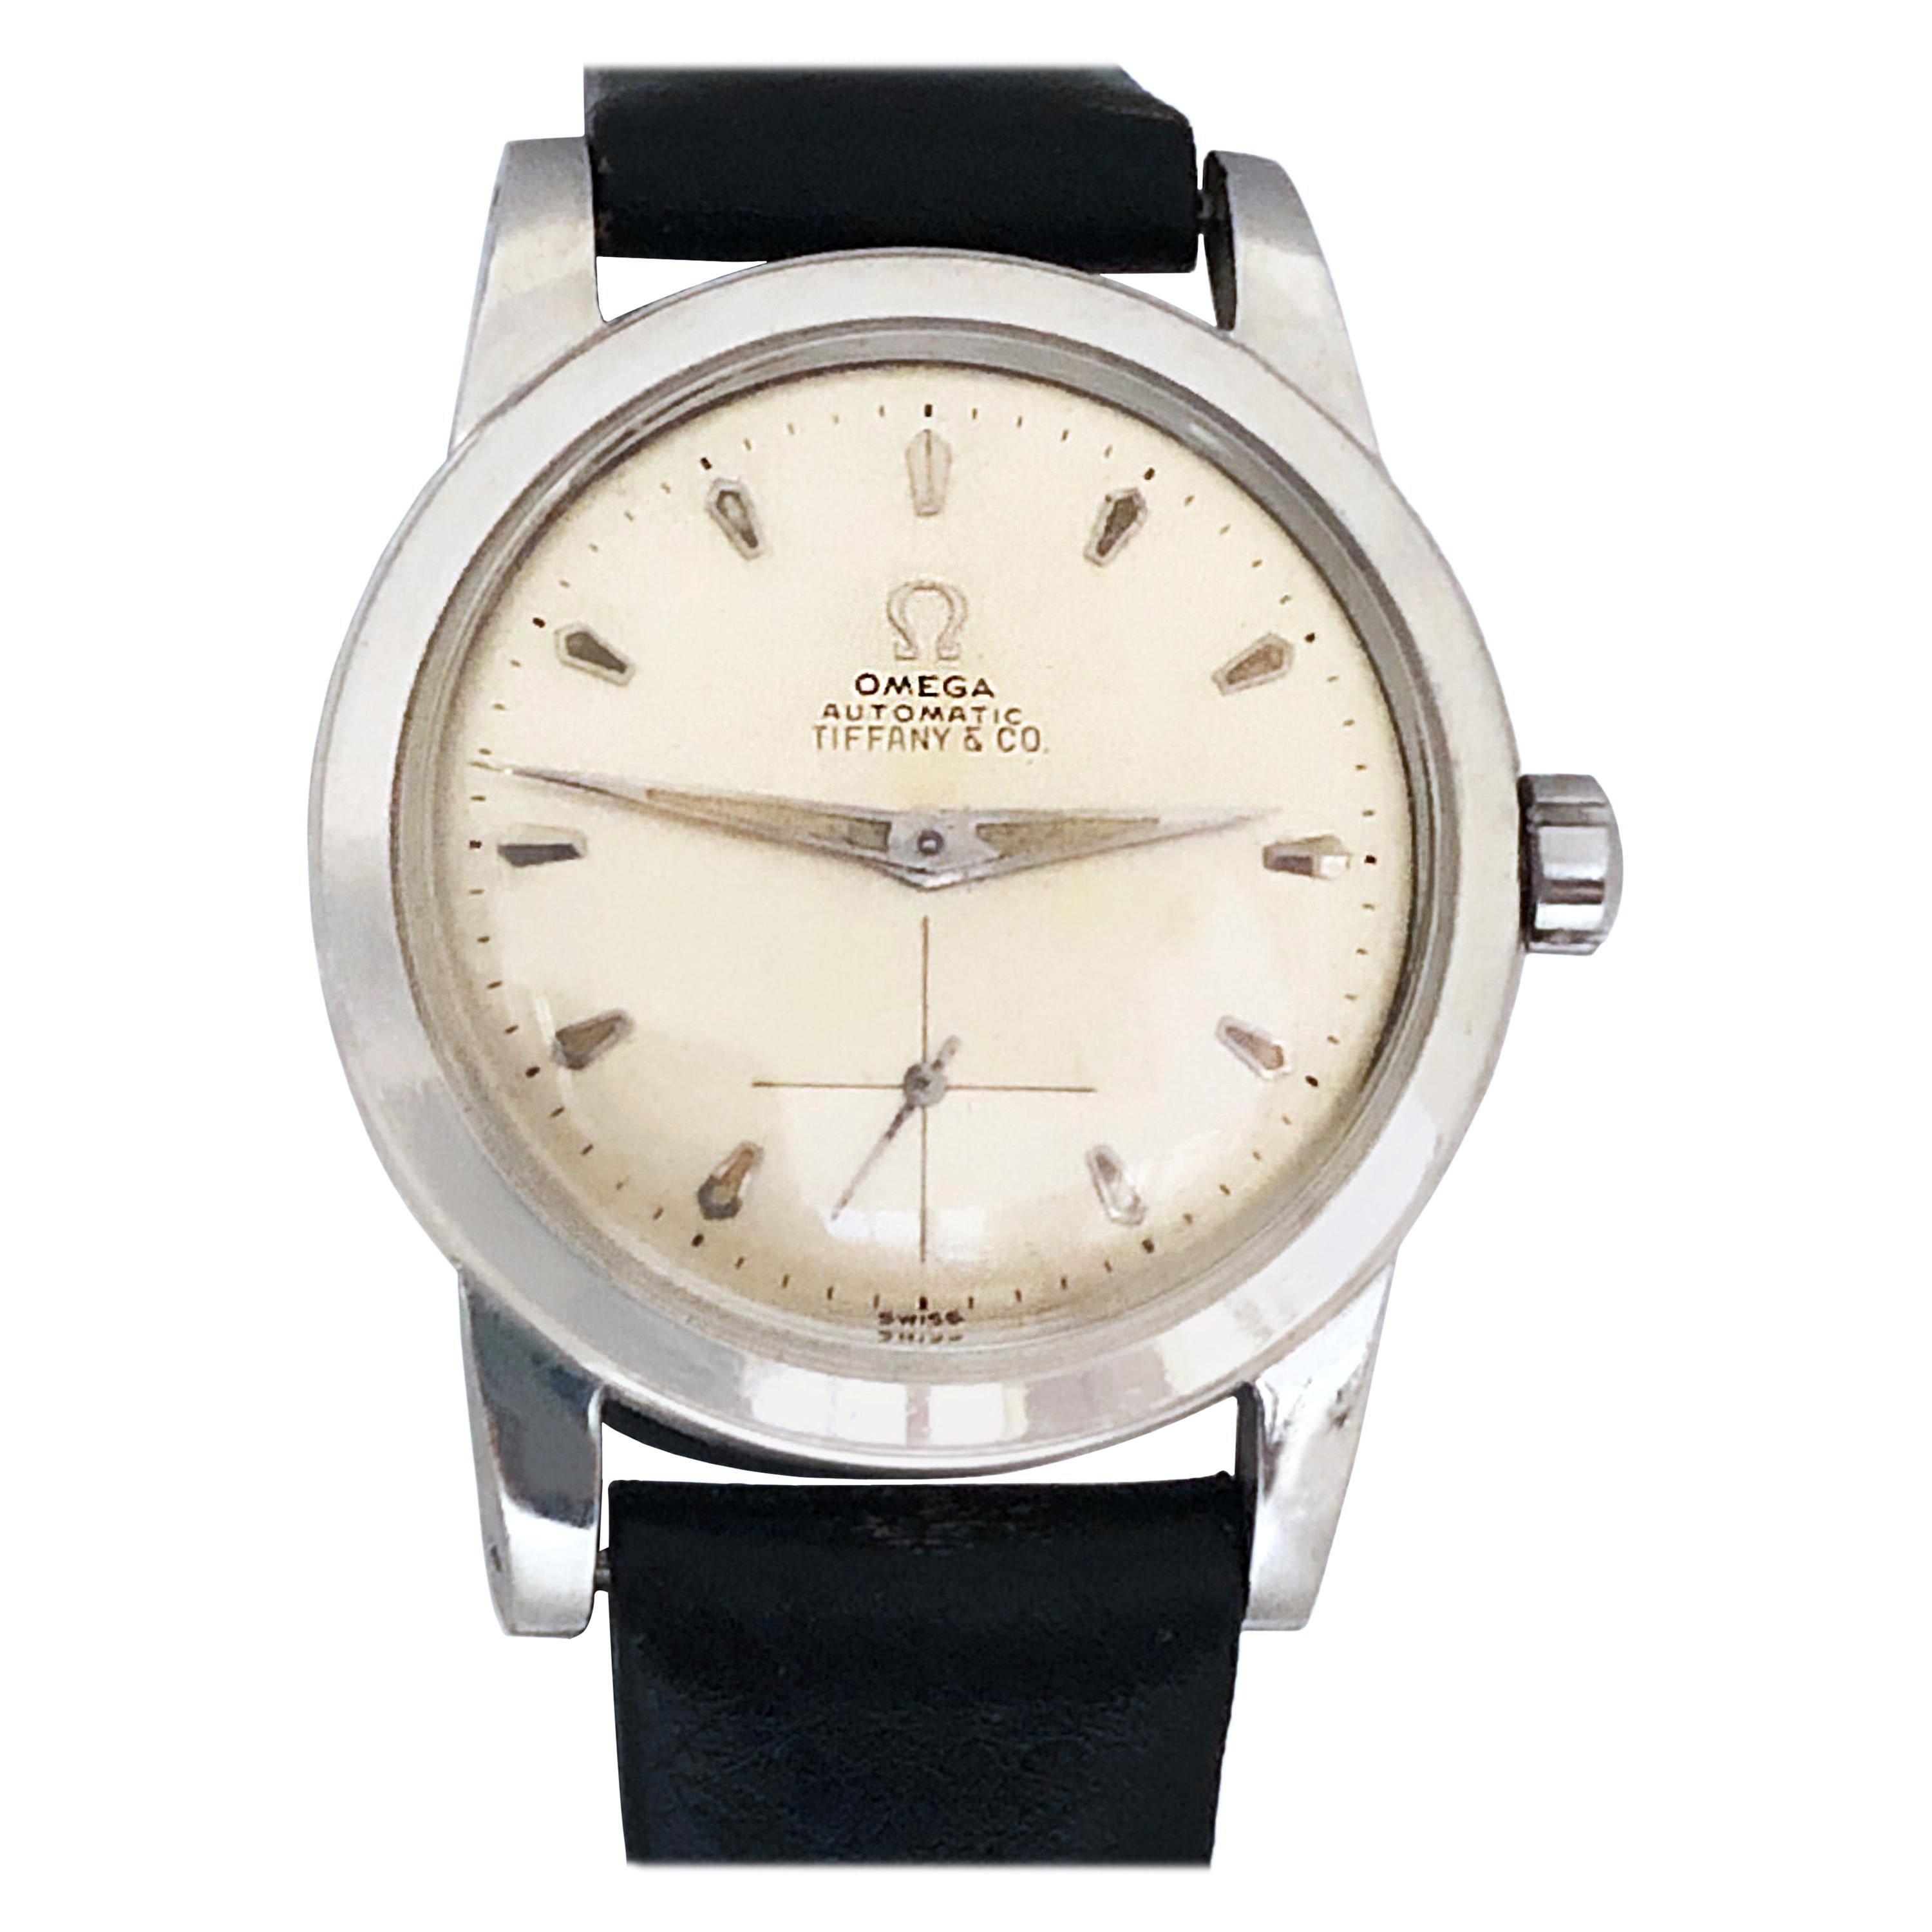 Omega for Tiffany & Co. 1950s Steel Cased Automatic Wristwatch